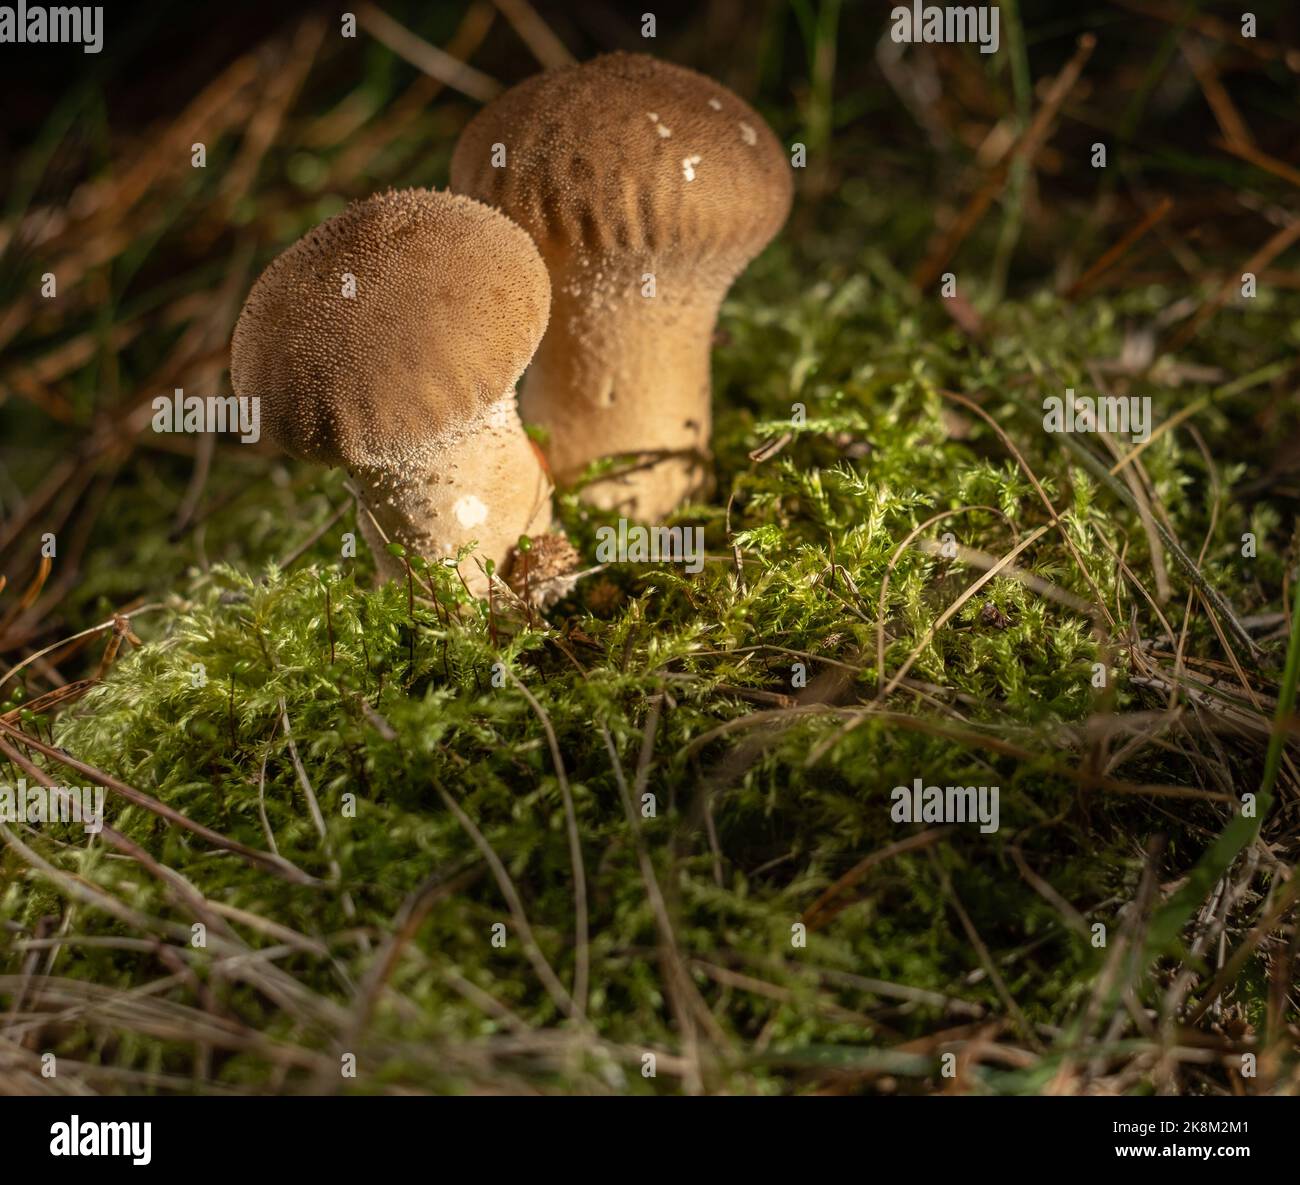 Forest fungus. Common puffball mushroom - Lycoperdon perlatum - growing in green moss in the autumn forest. Space for text Stock Photo